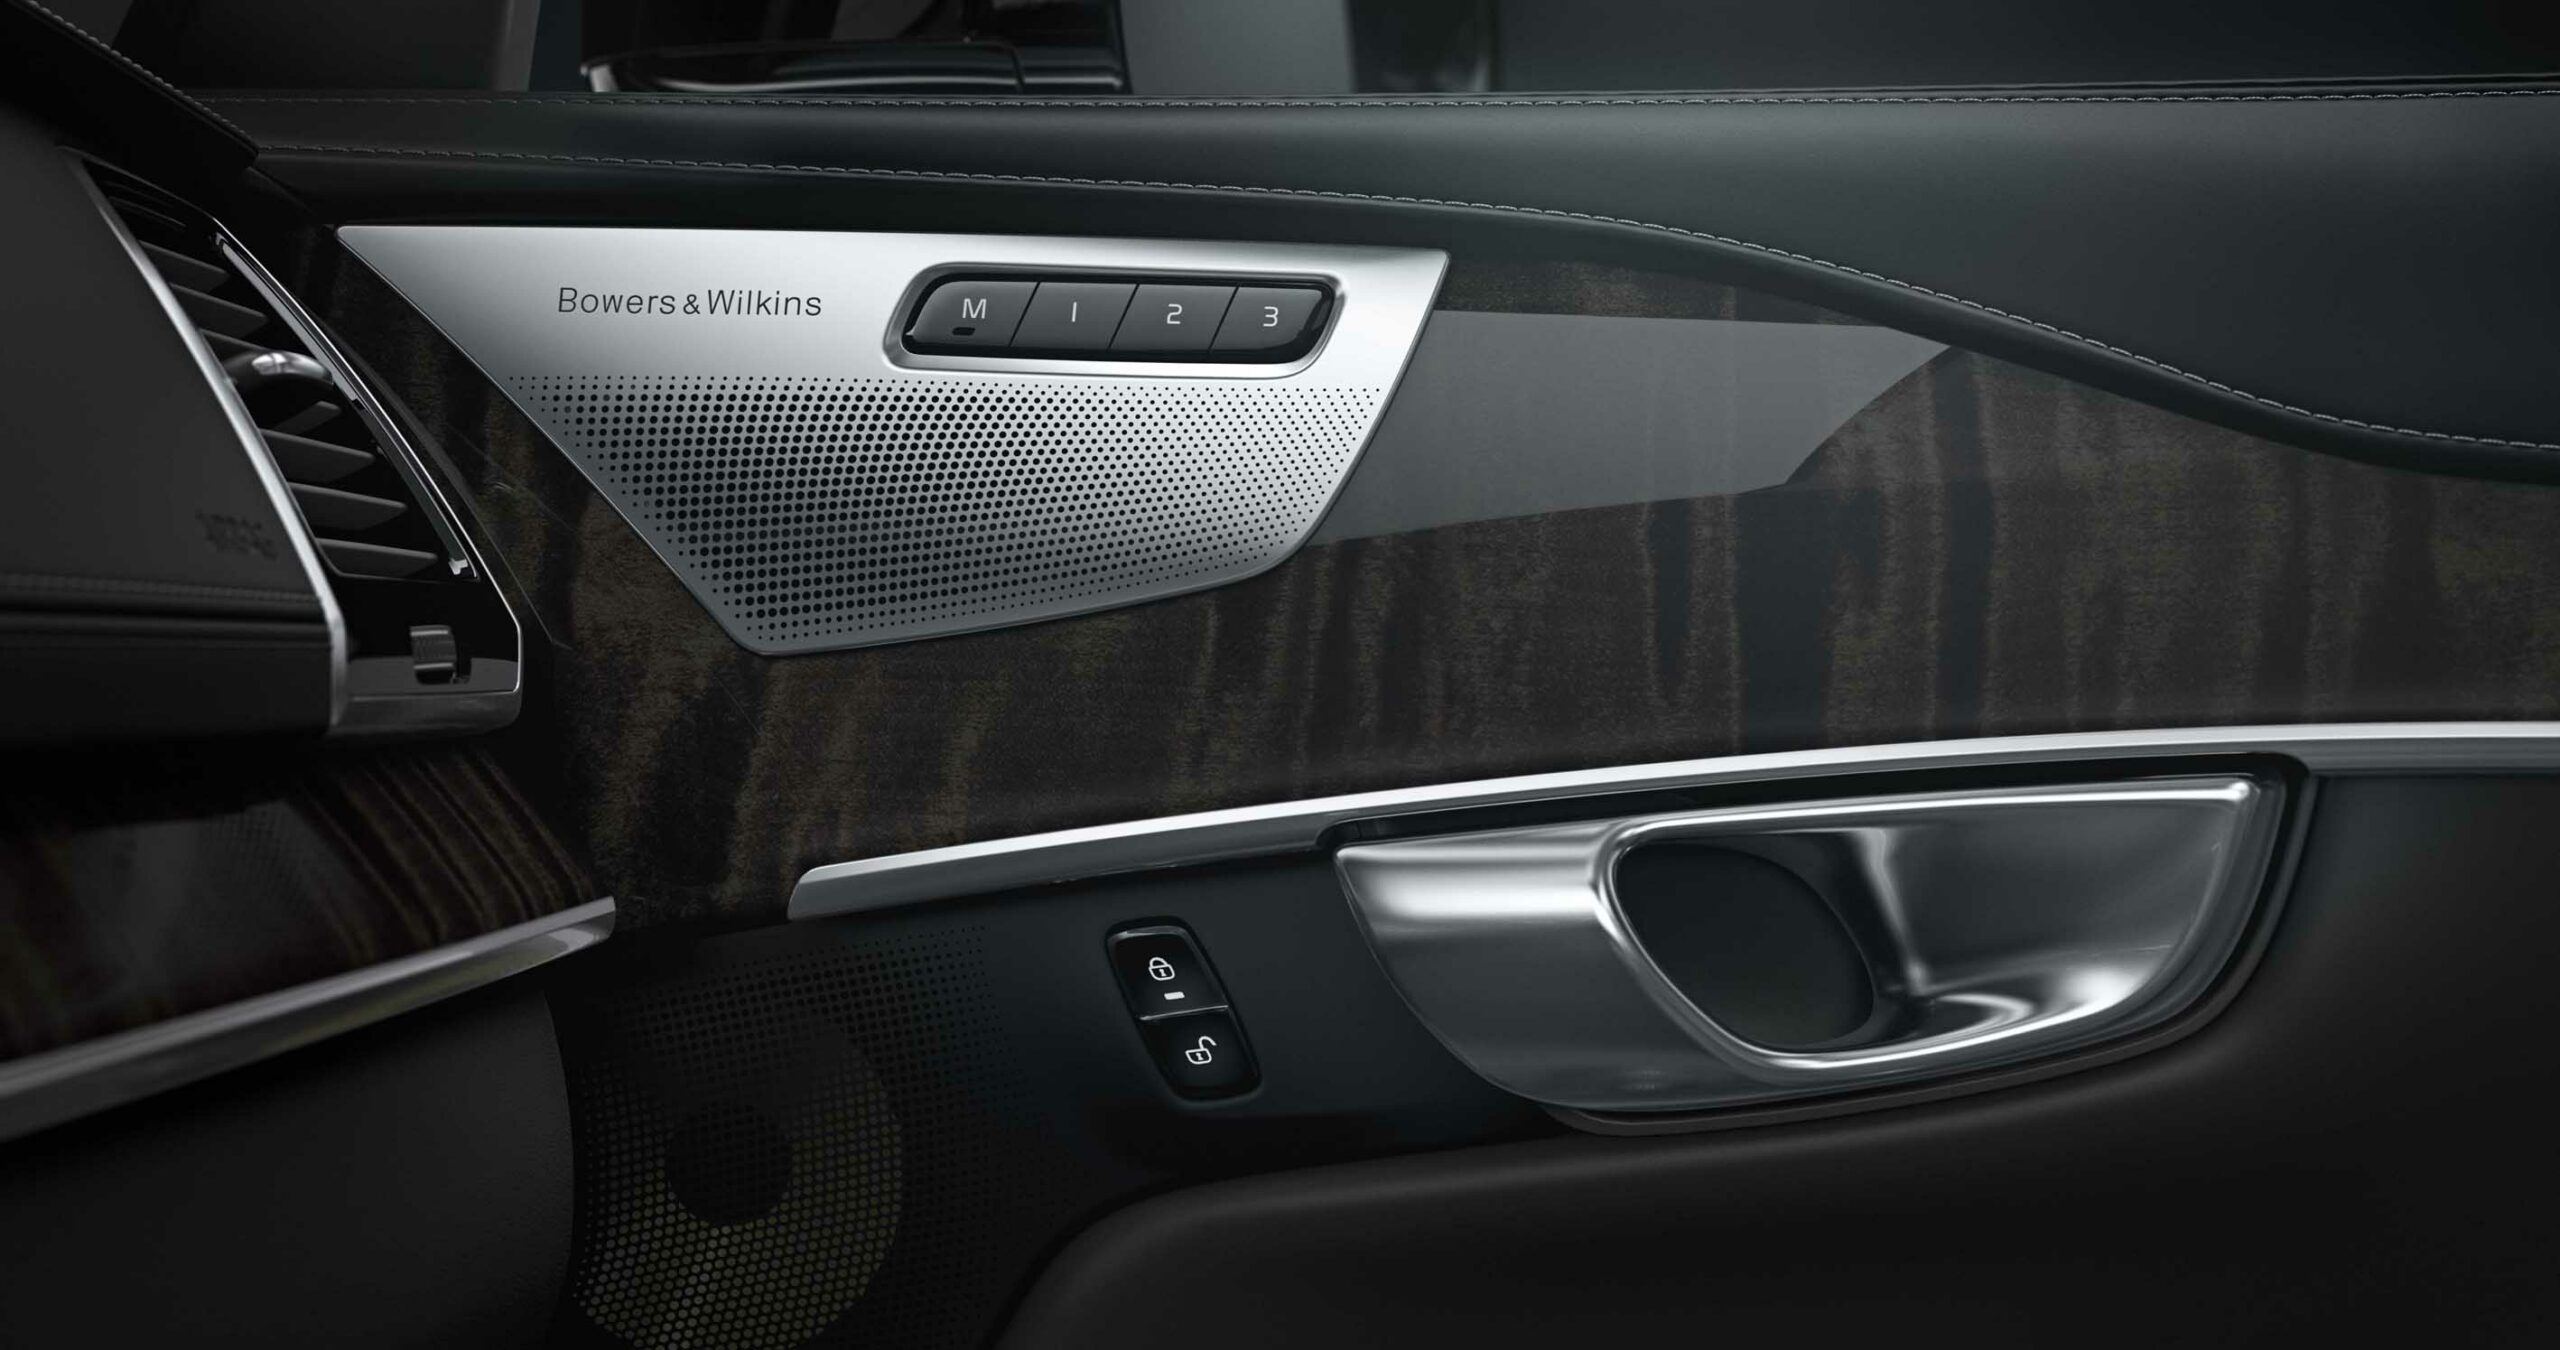 volve xc-90 bowers & wilkins sound system